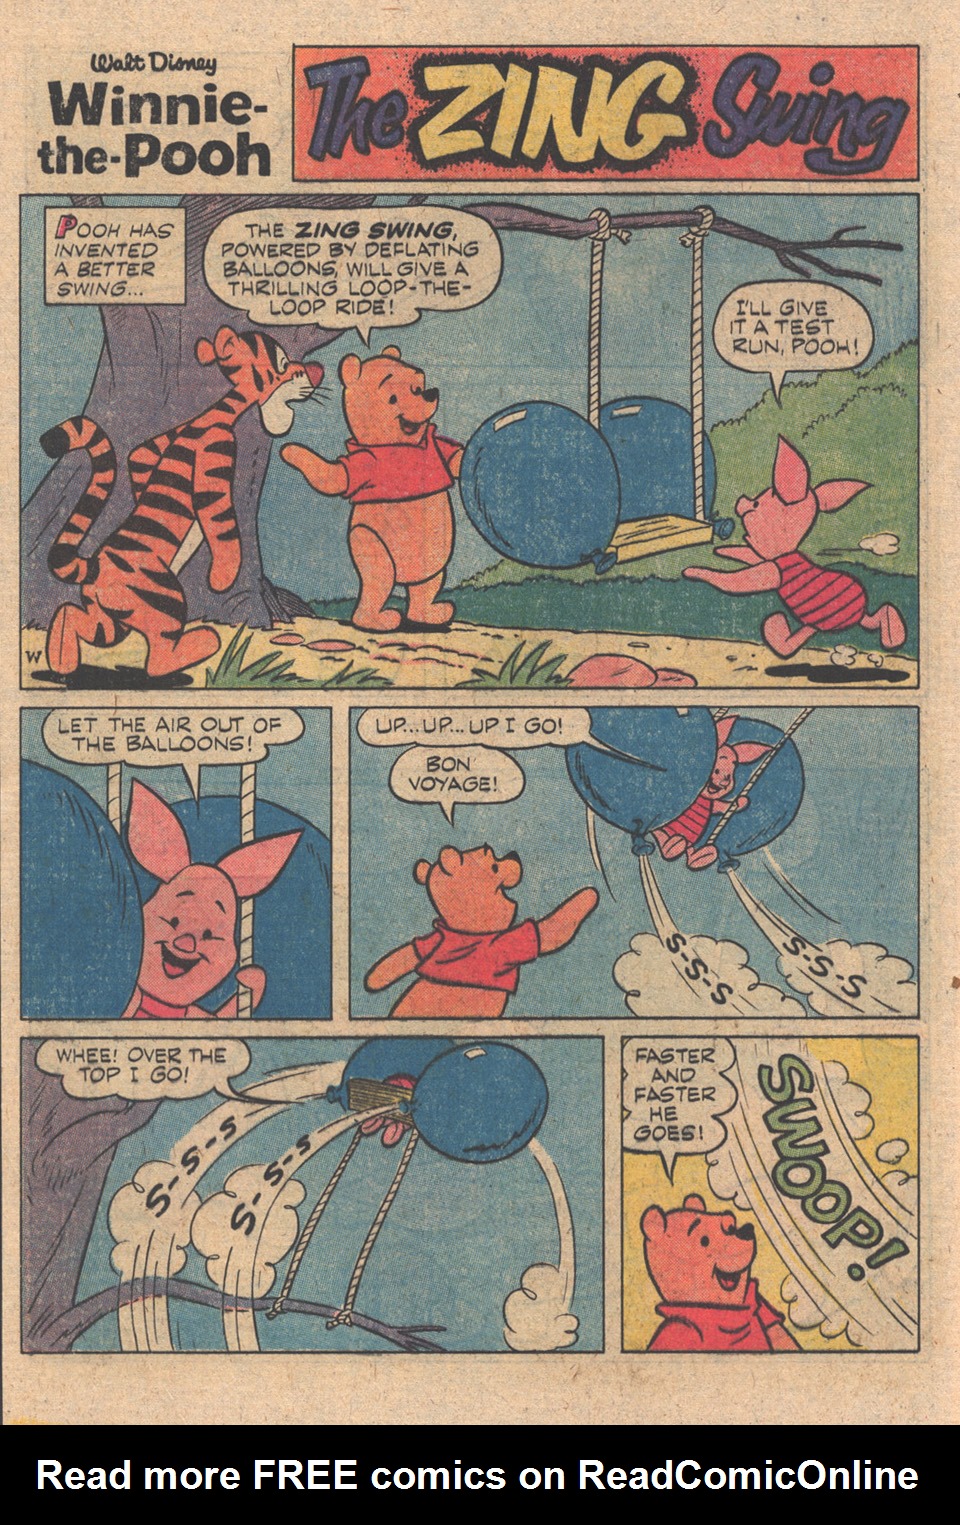 Read online Winnie-the-Pooh comic -  Issue #24 - 12